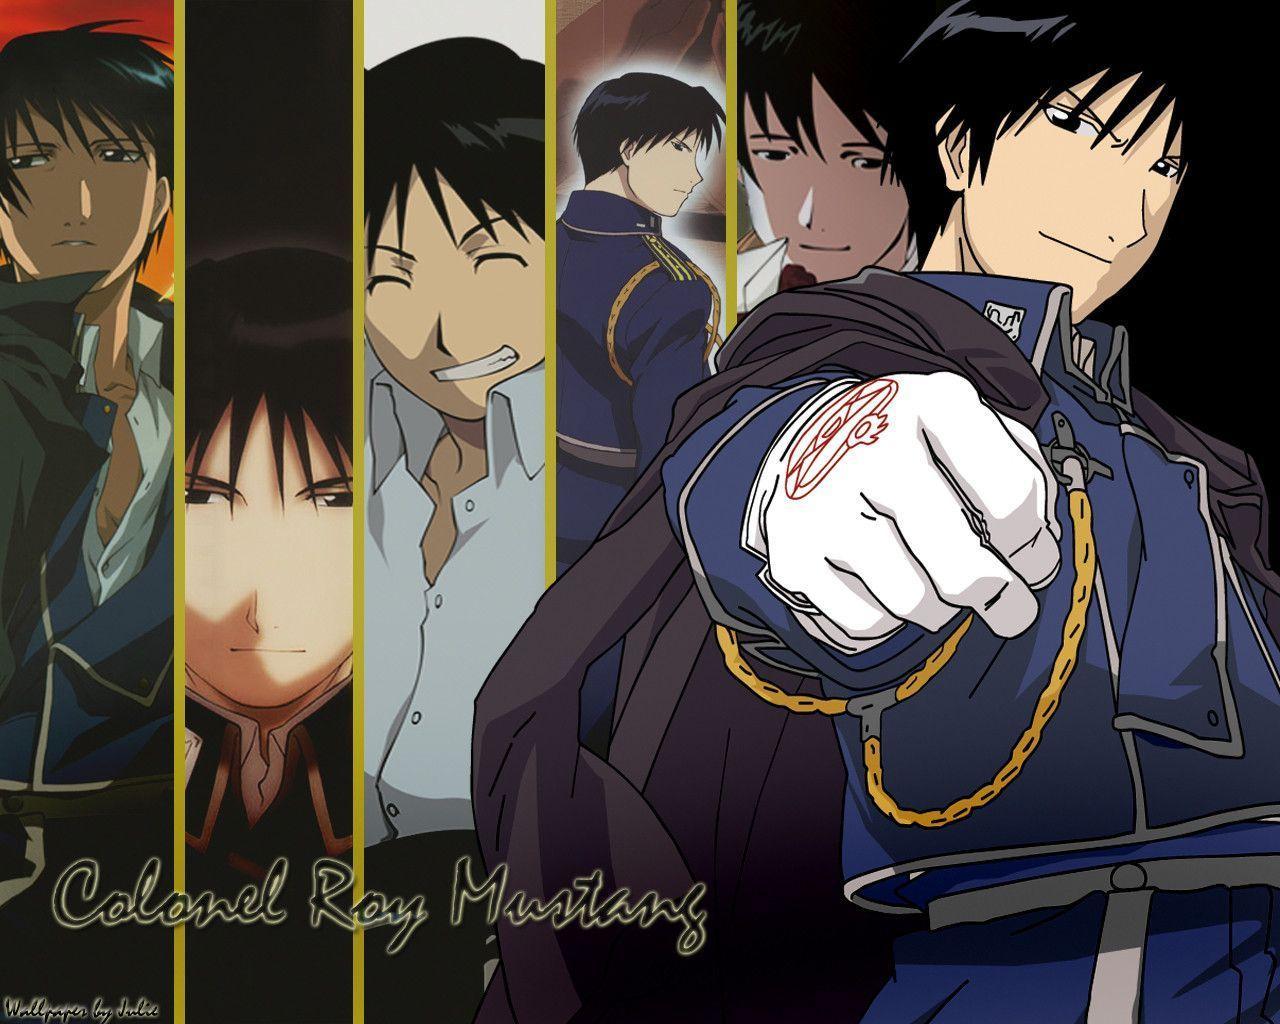 Edward Elric and Roy Mustang